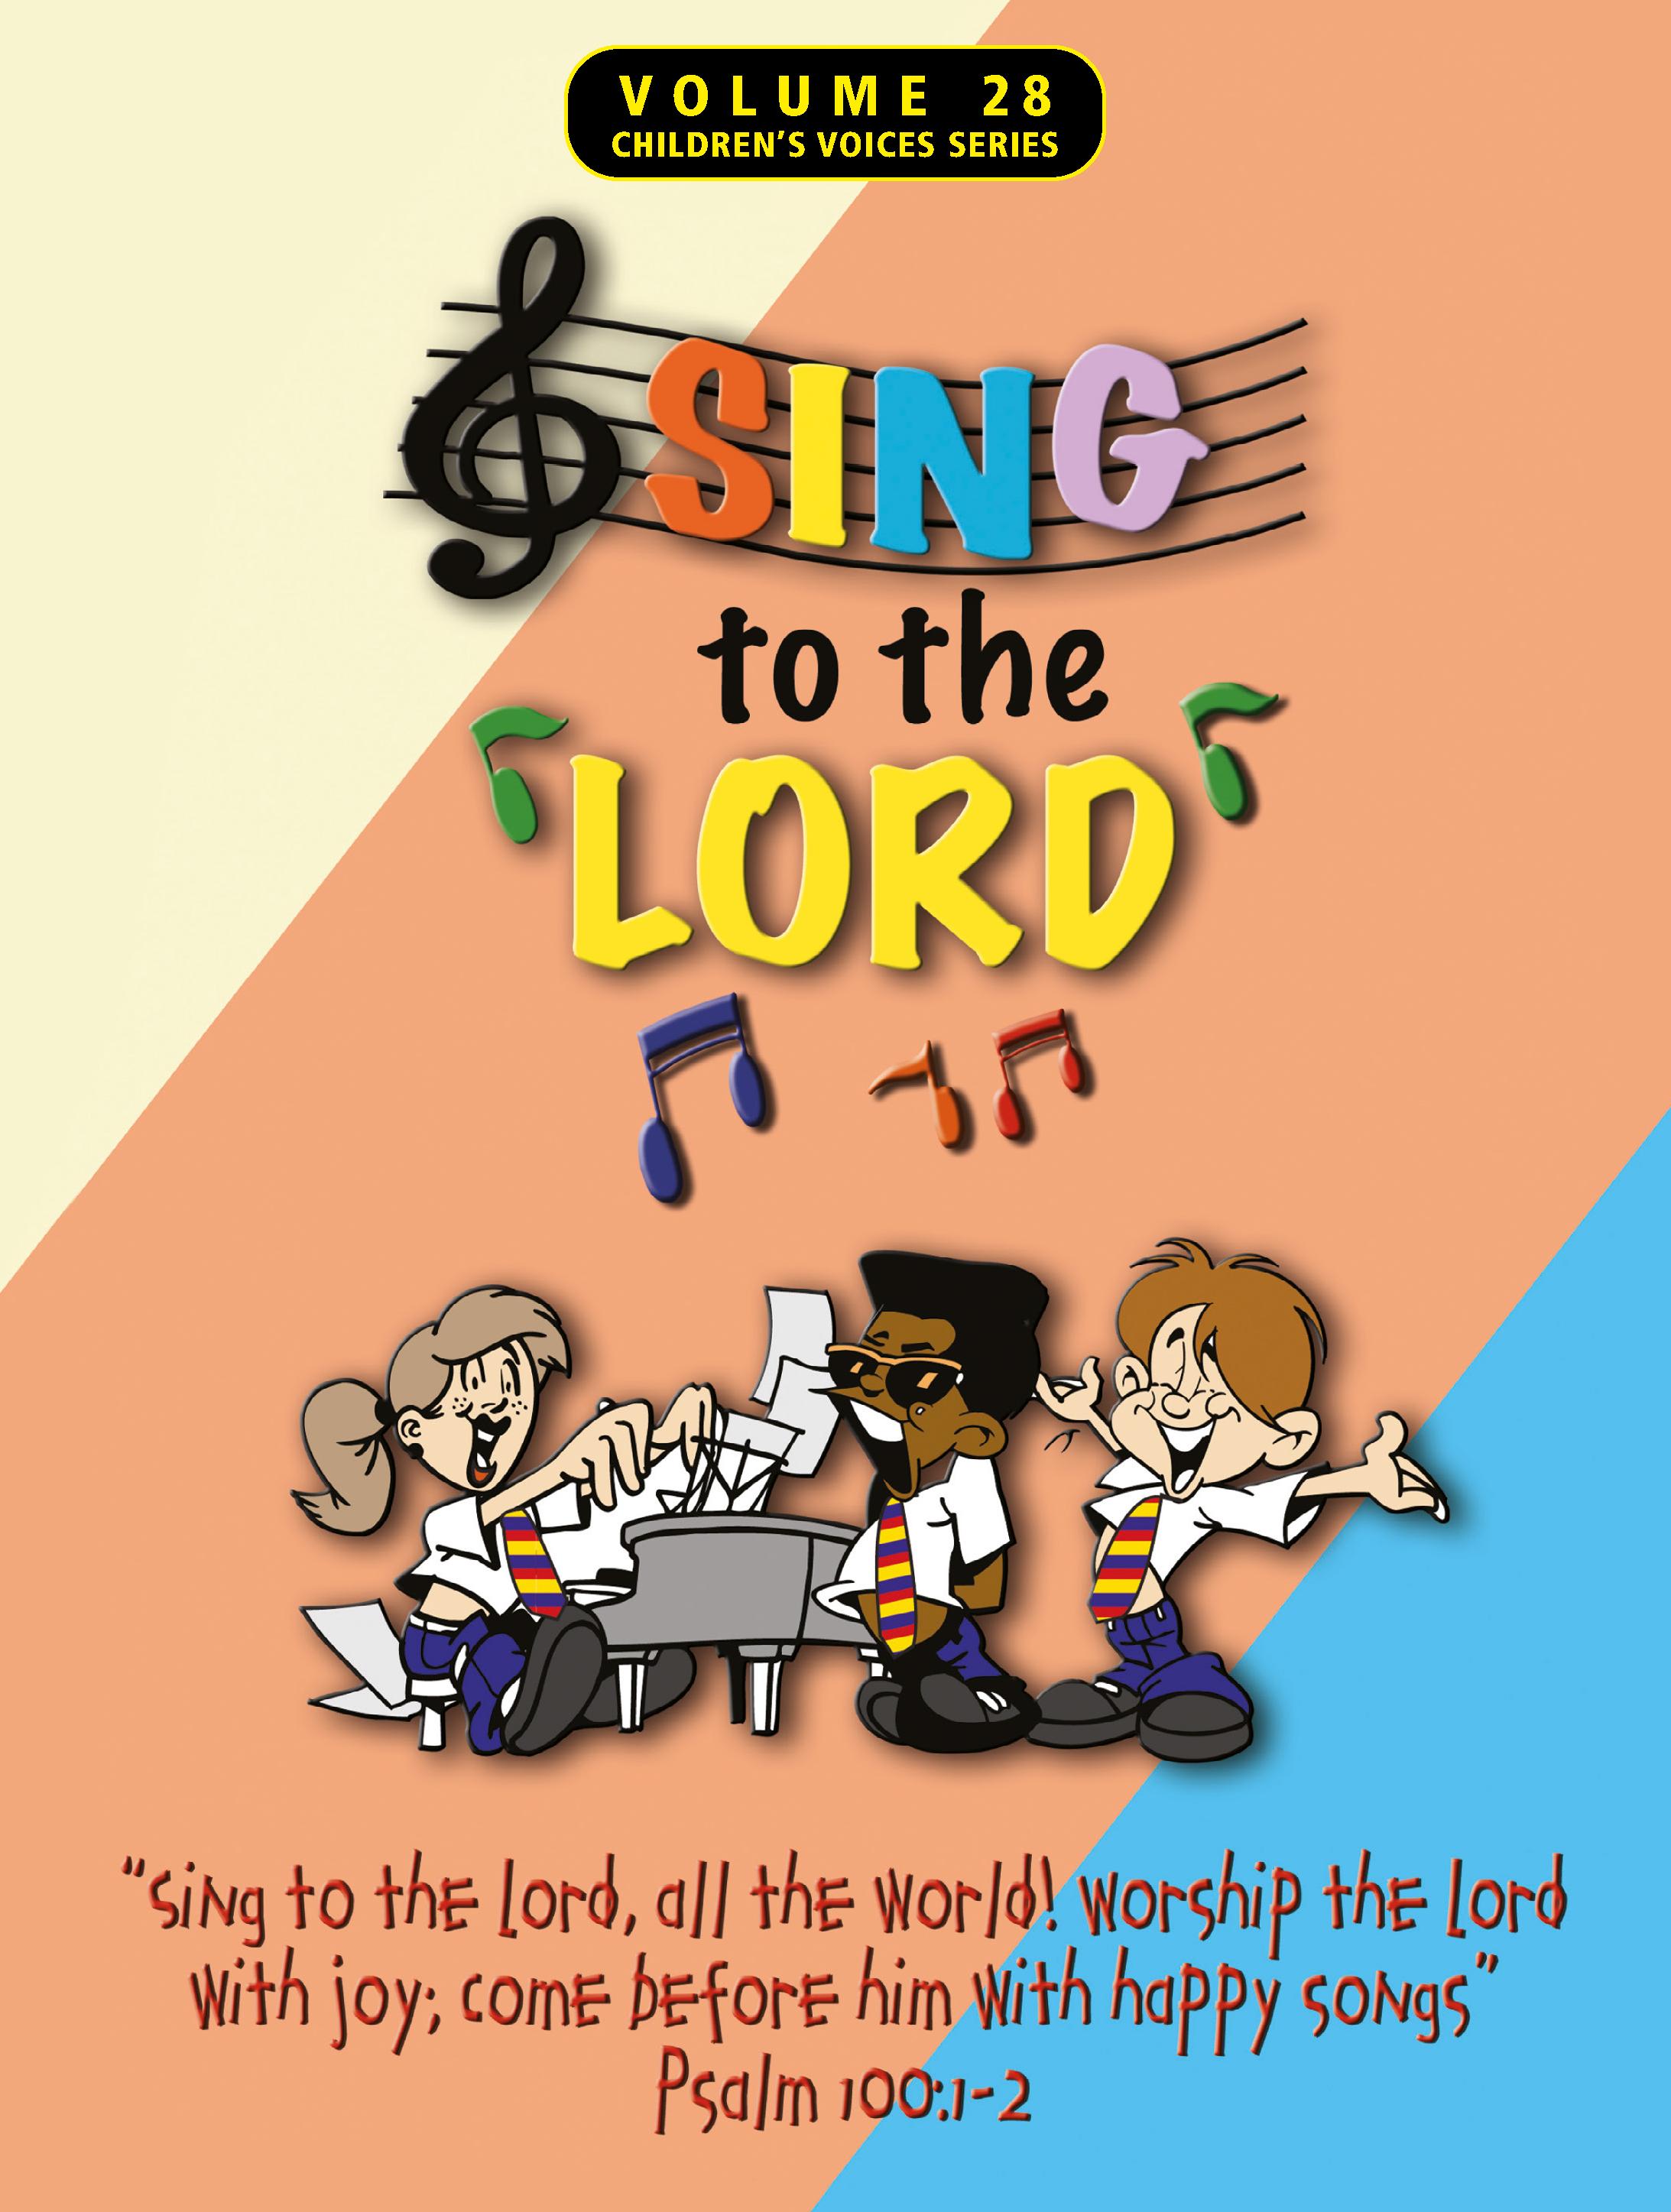 Sing to the Lord, Children's Voices, Volume 28